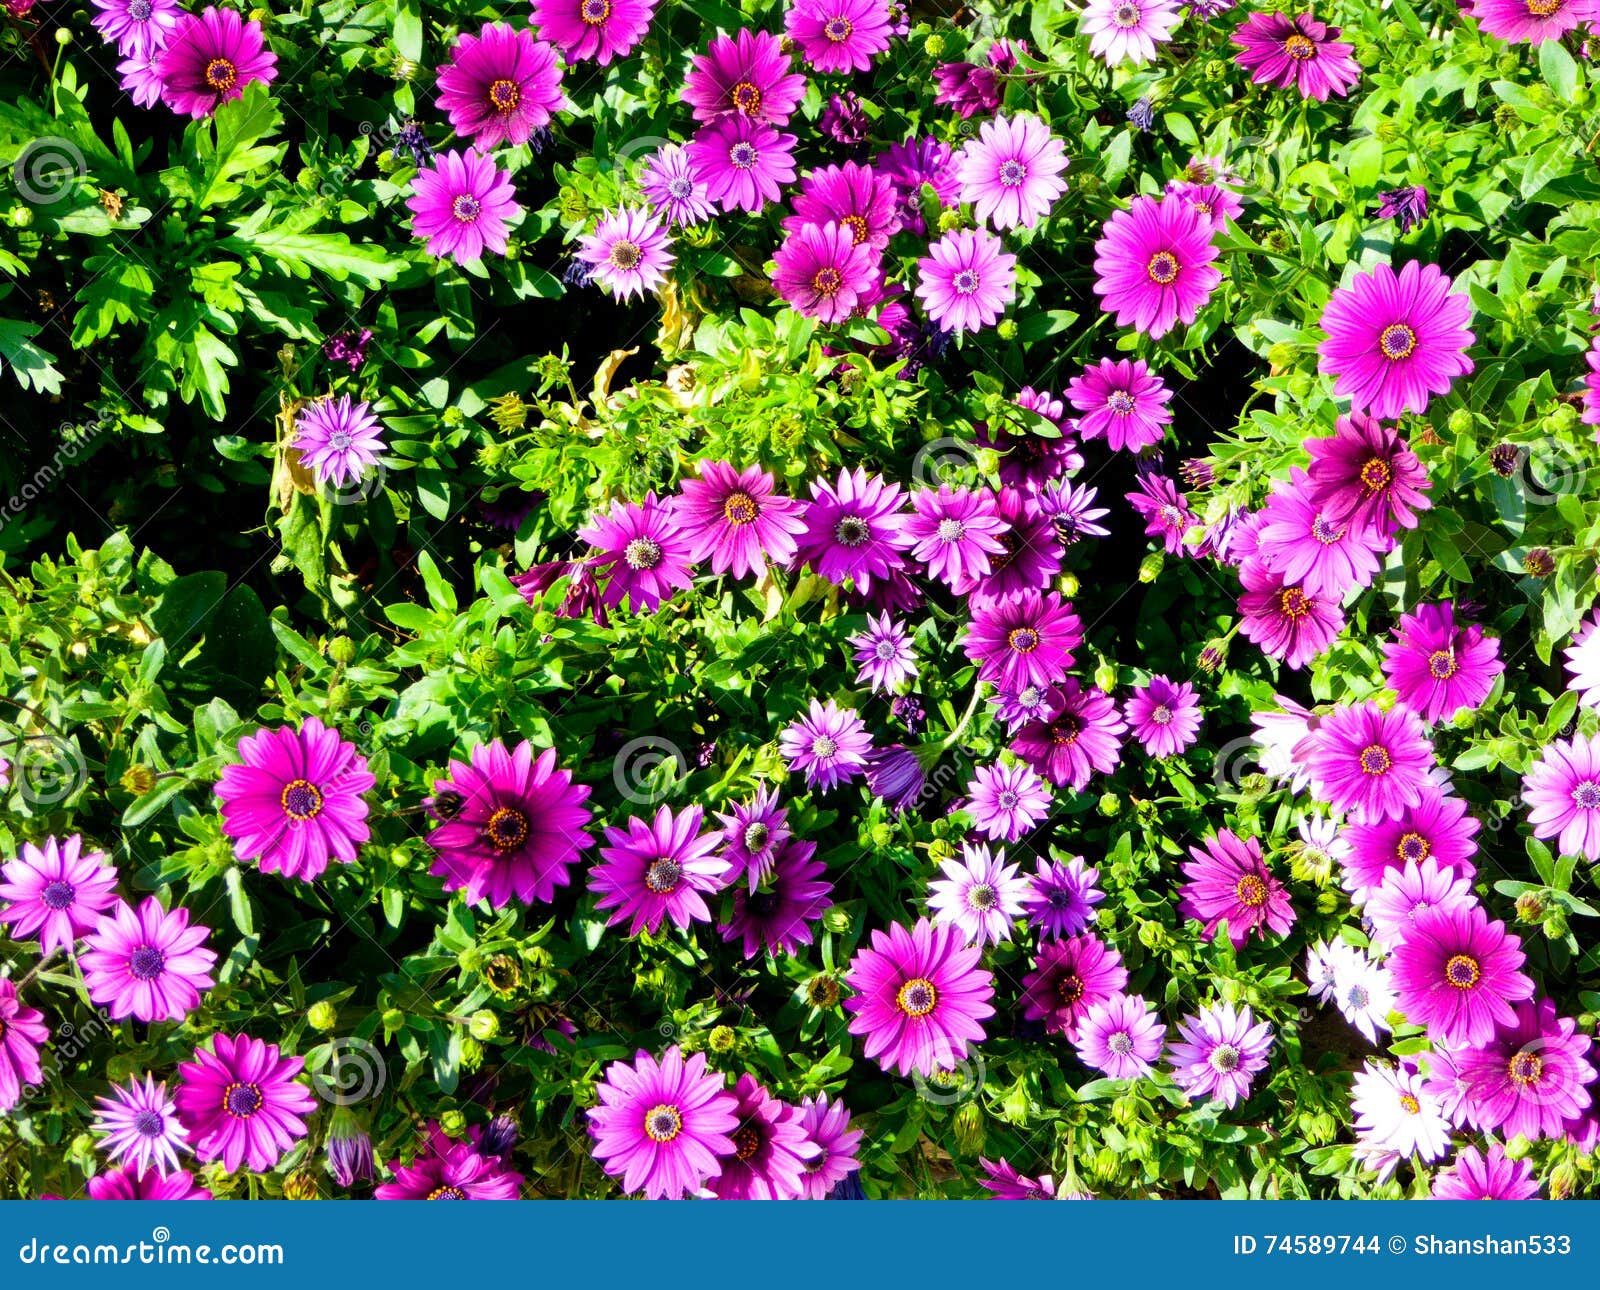 A Filed Of Purple Daisies Blooming Stock Photo Image Of Flowers